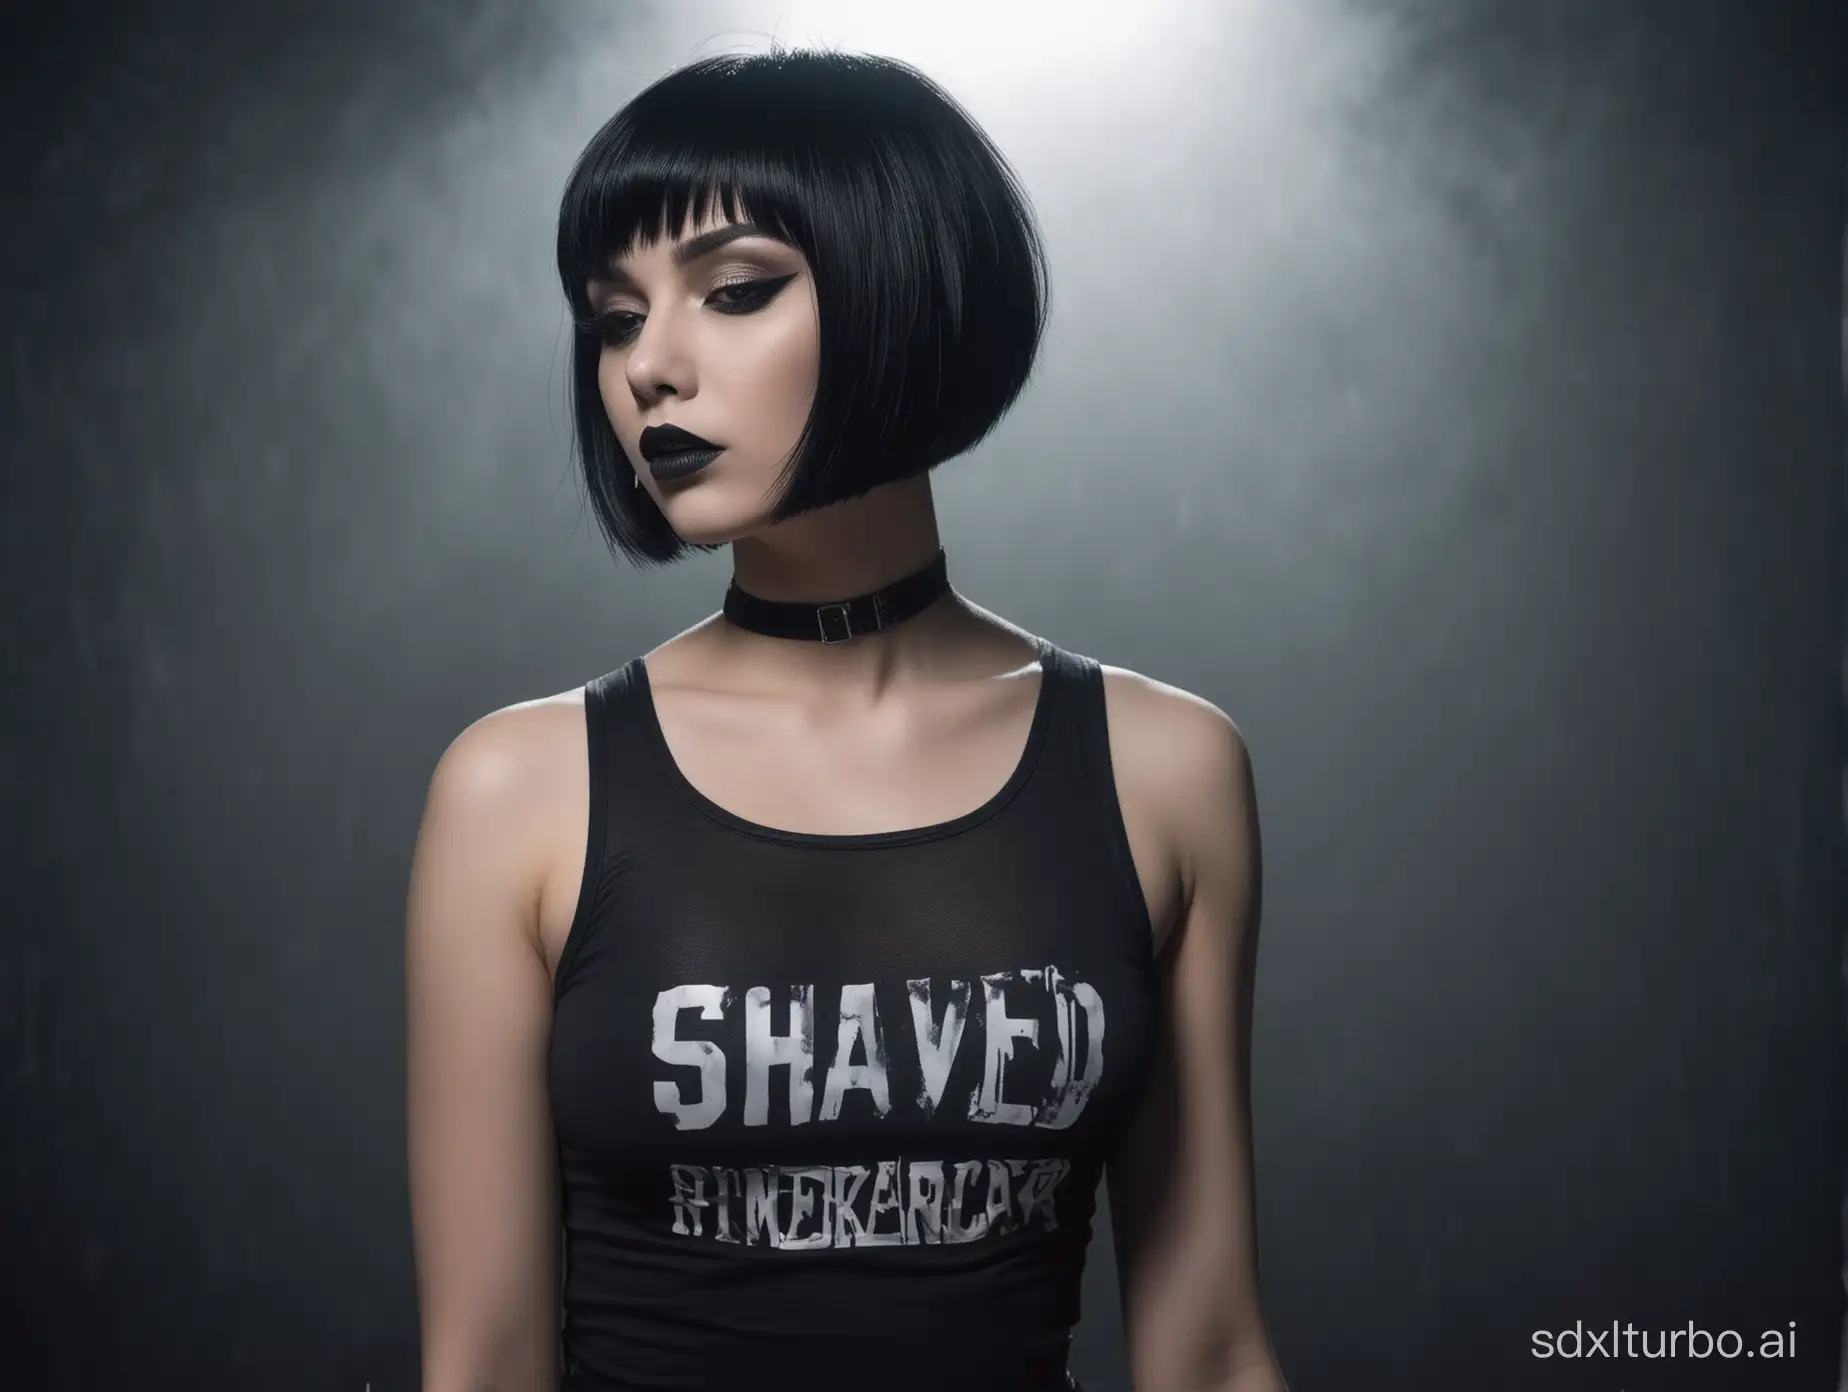 Gothic-Beauty-with-White-Skin-and-Black-Hair-in-Dramatic-Night-Fog